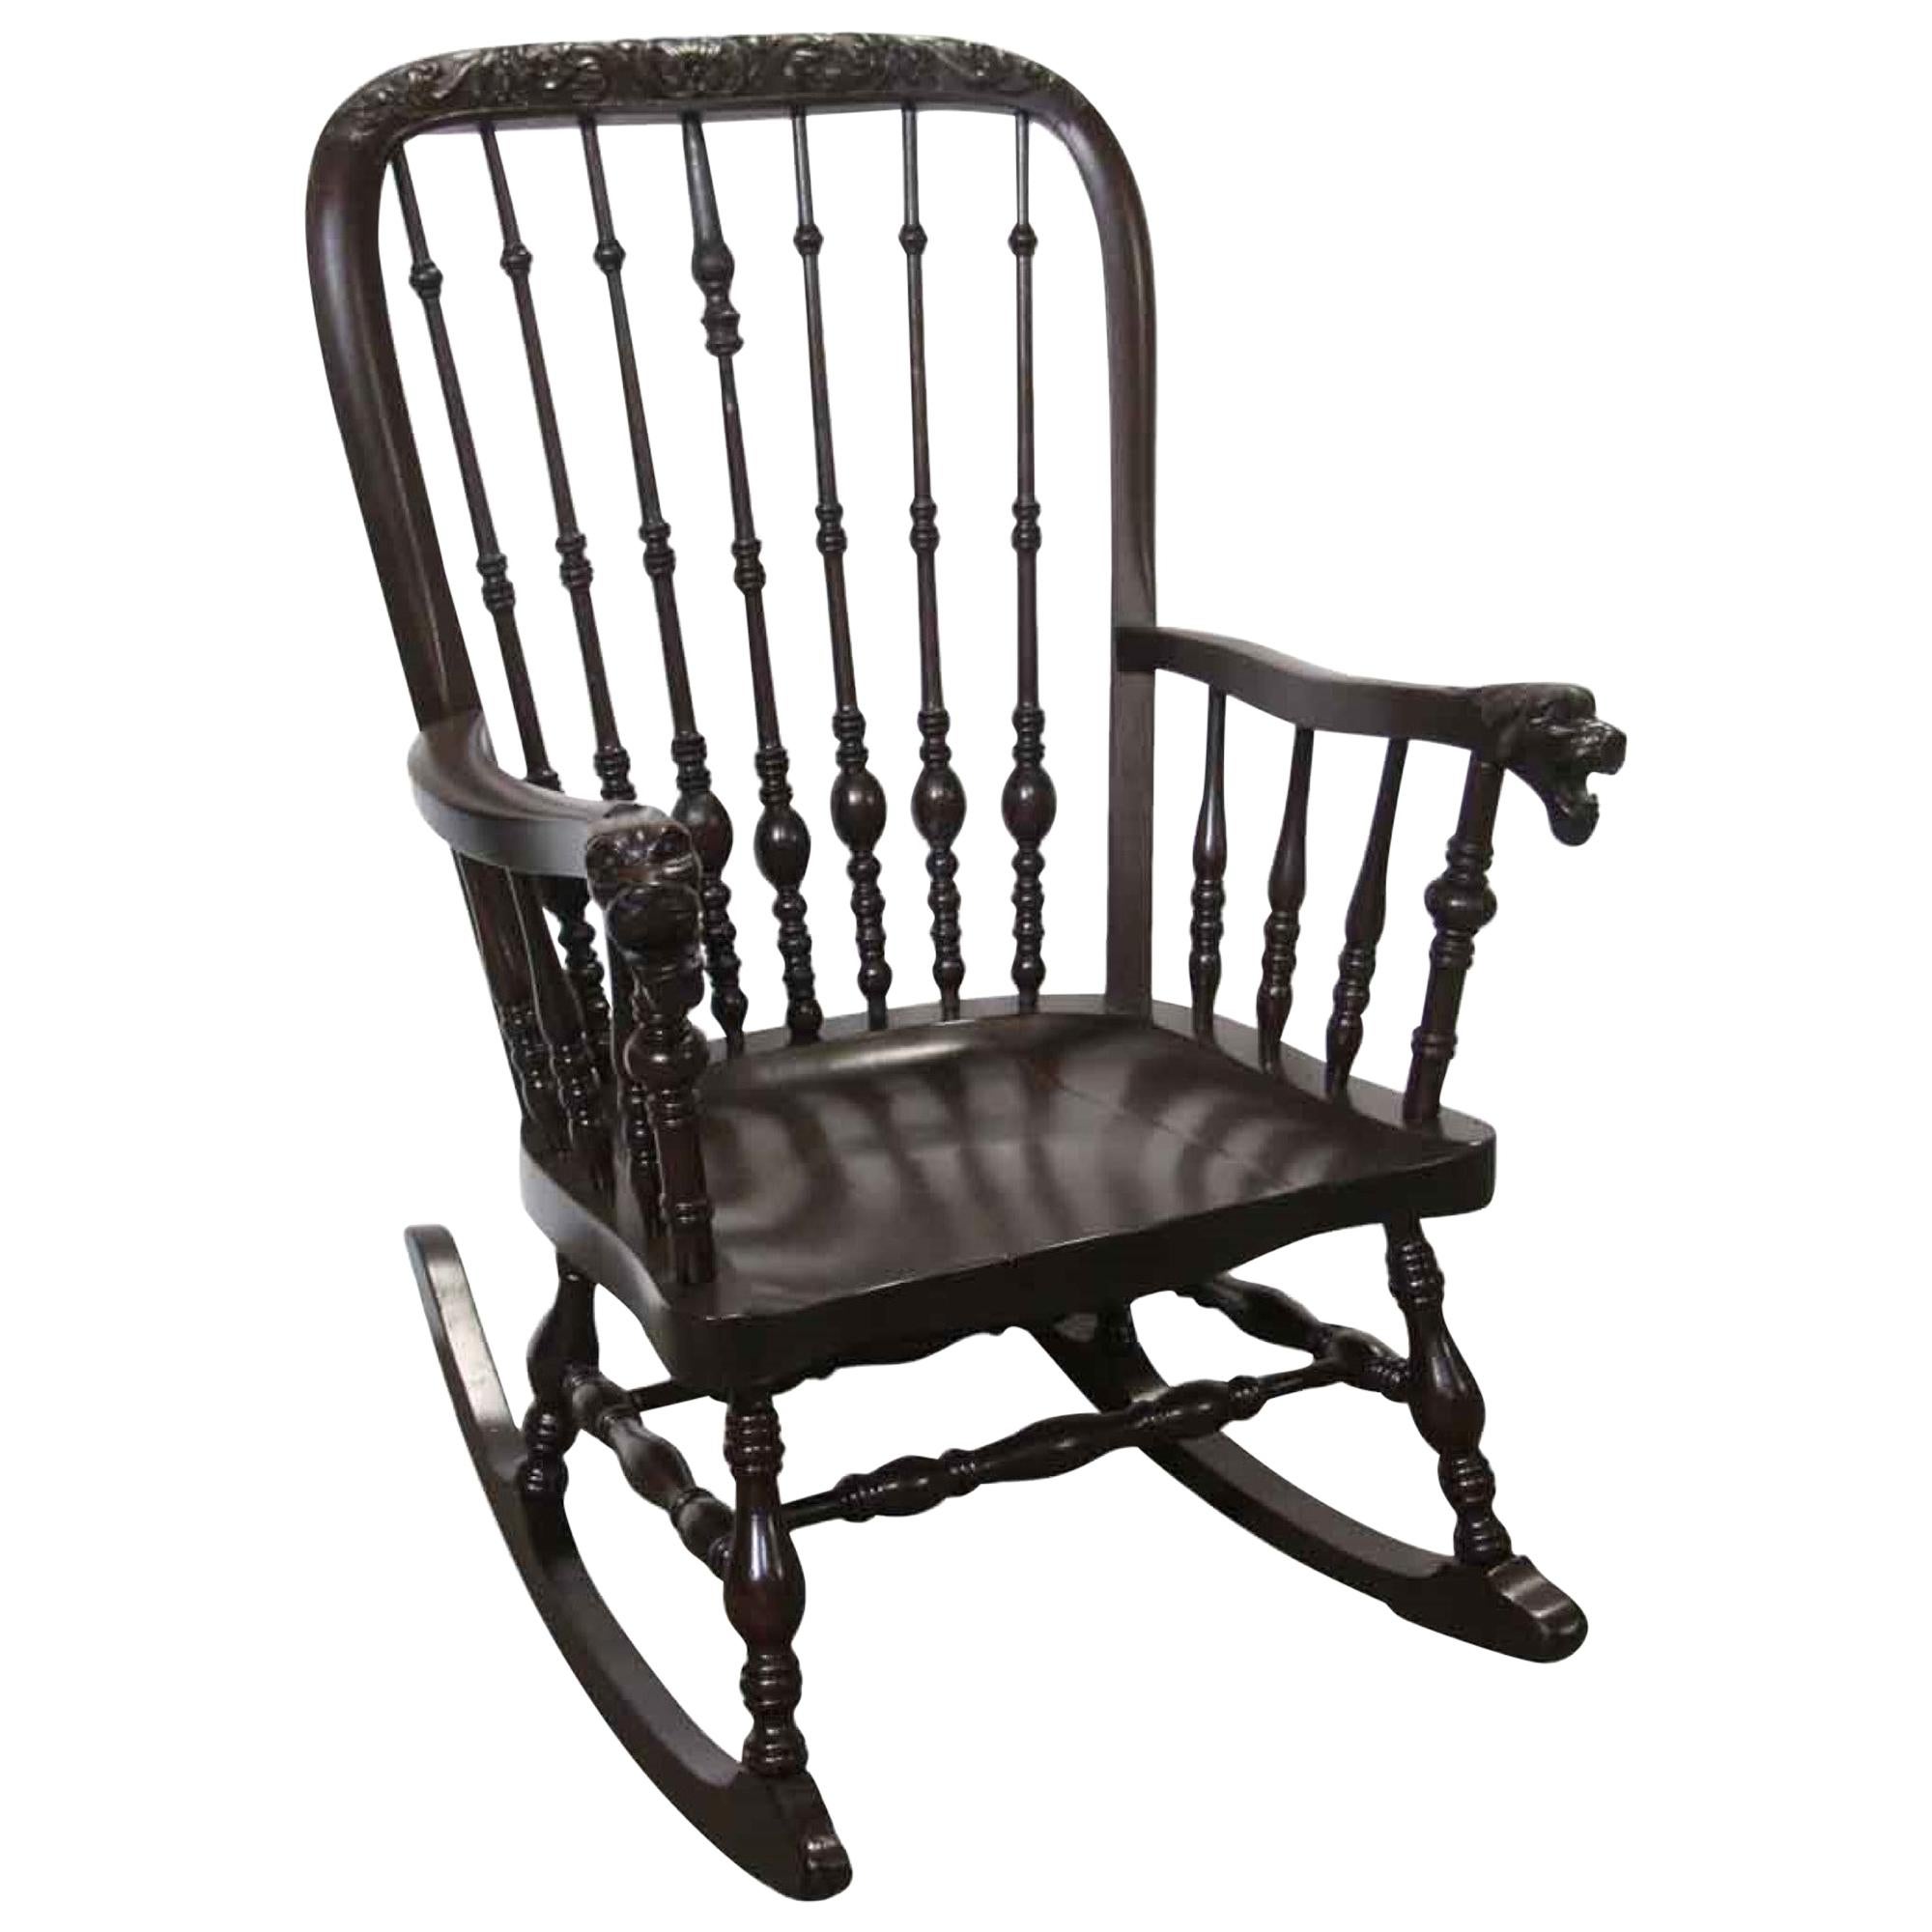 1890 Antique Victorian Carved Oak Rocking Chair with Griffon Arms